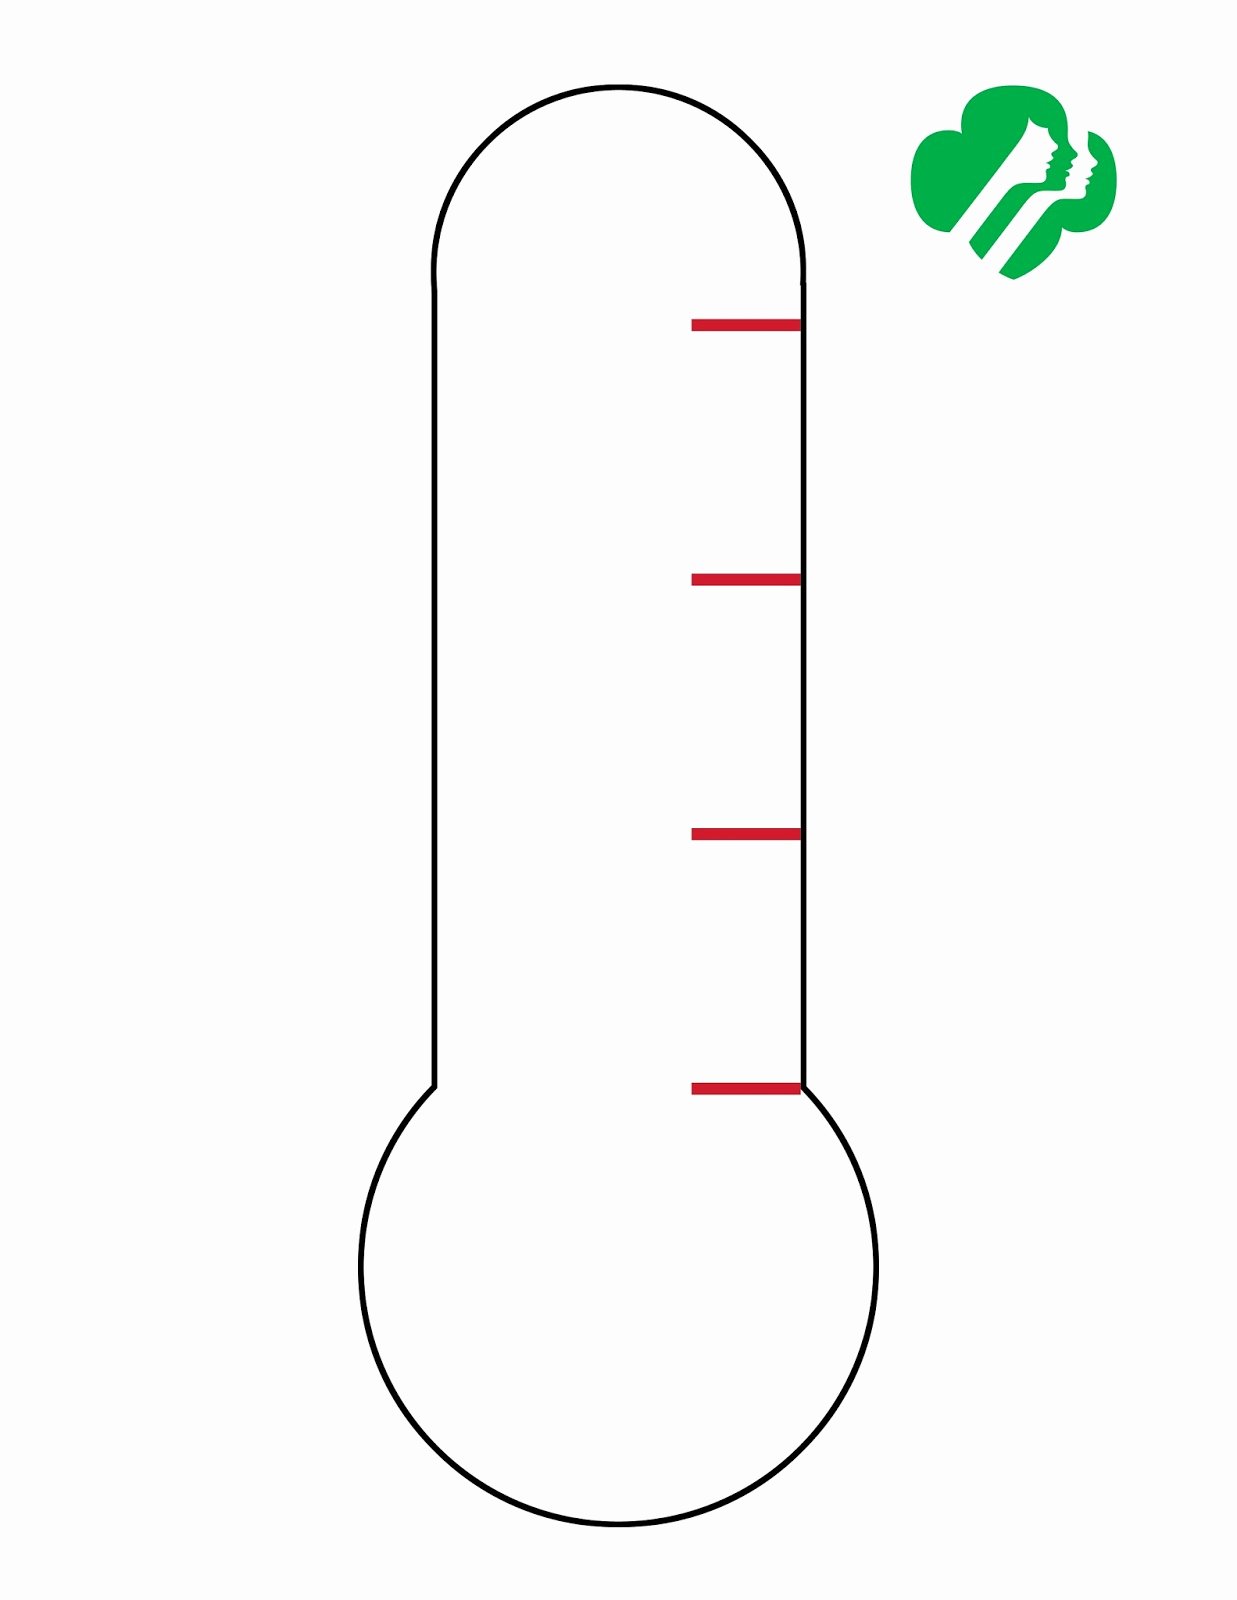 Printable thermometer Goal Chart Awesome Free Blank thermometer Download Free Clip Art Free Clip